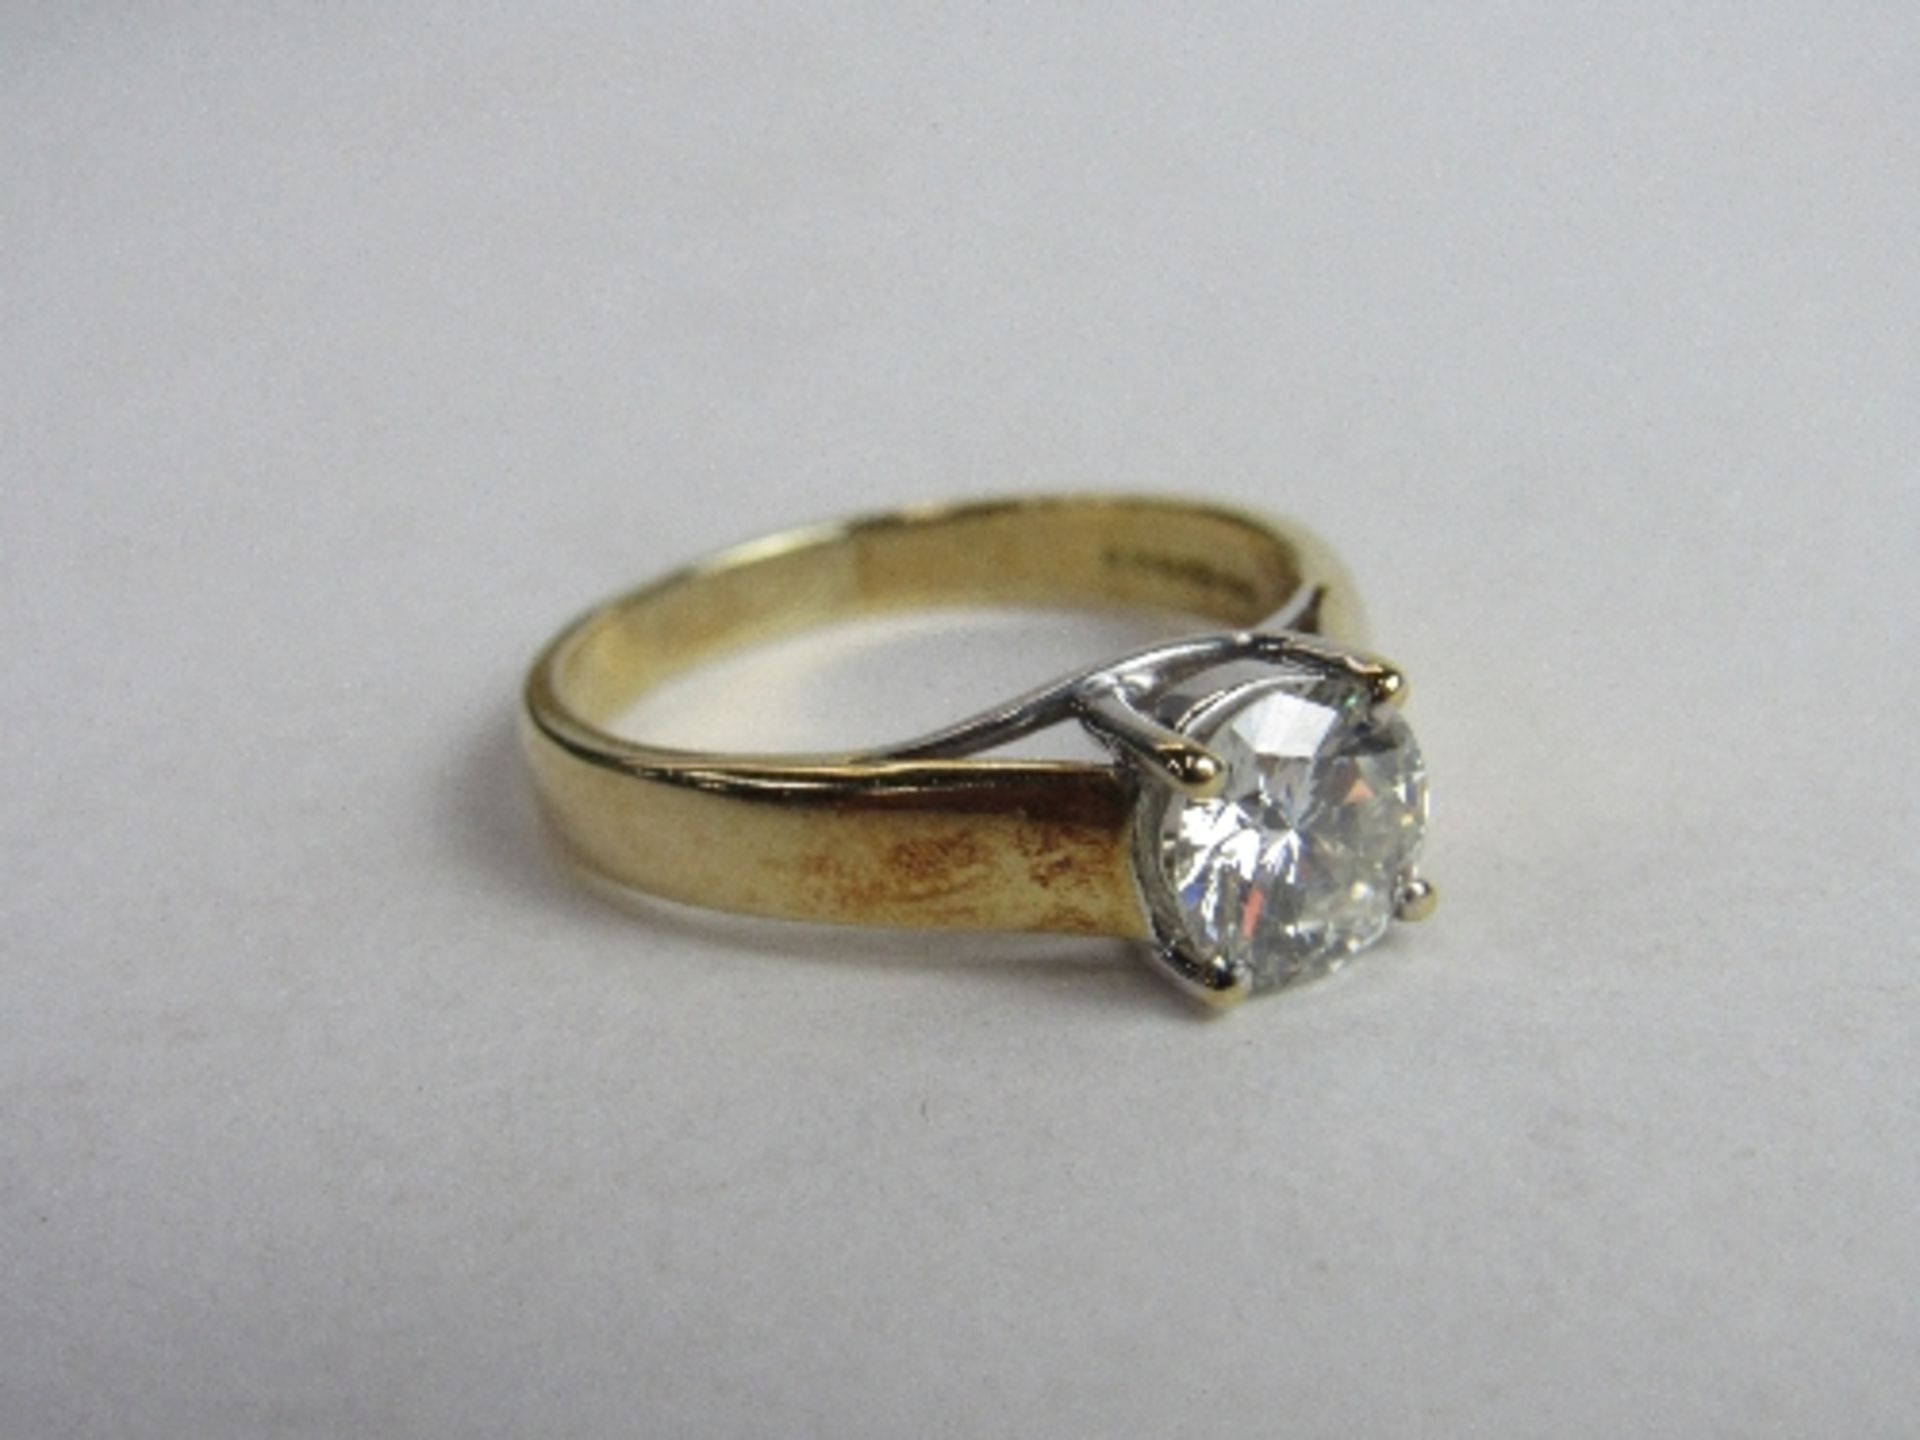 18ct gold & diamond solitaire ring, size S, wt 5.5gms. Price guide £750-850. - Image 3 of 4